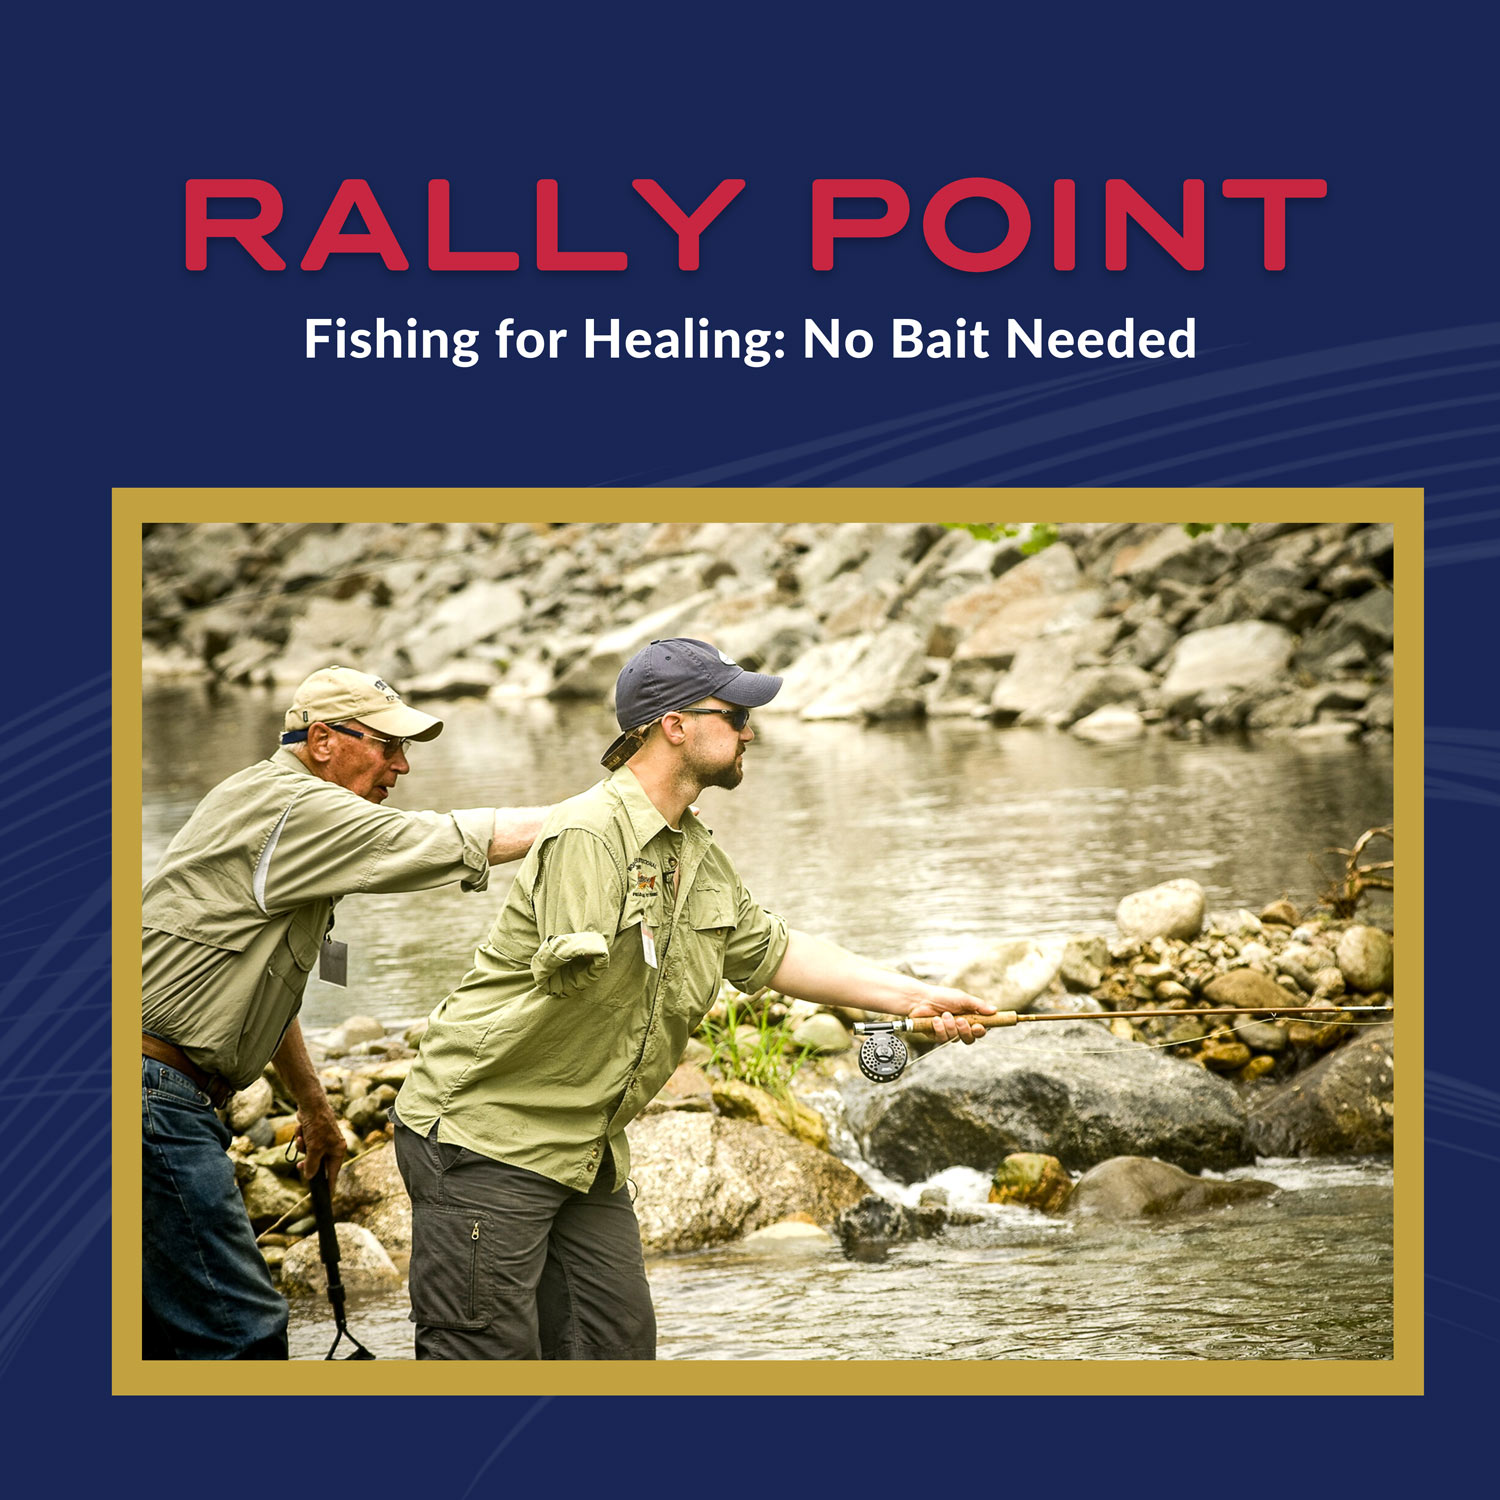 Rally Point – Fishing for Healing: No Bait Needed